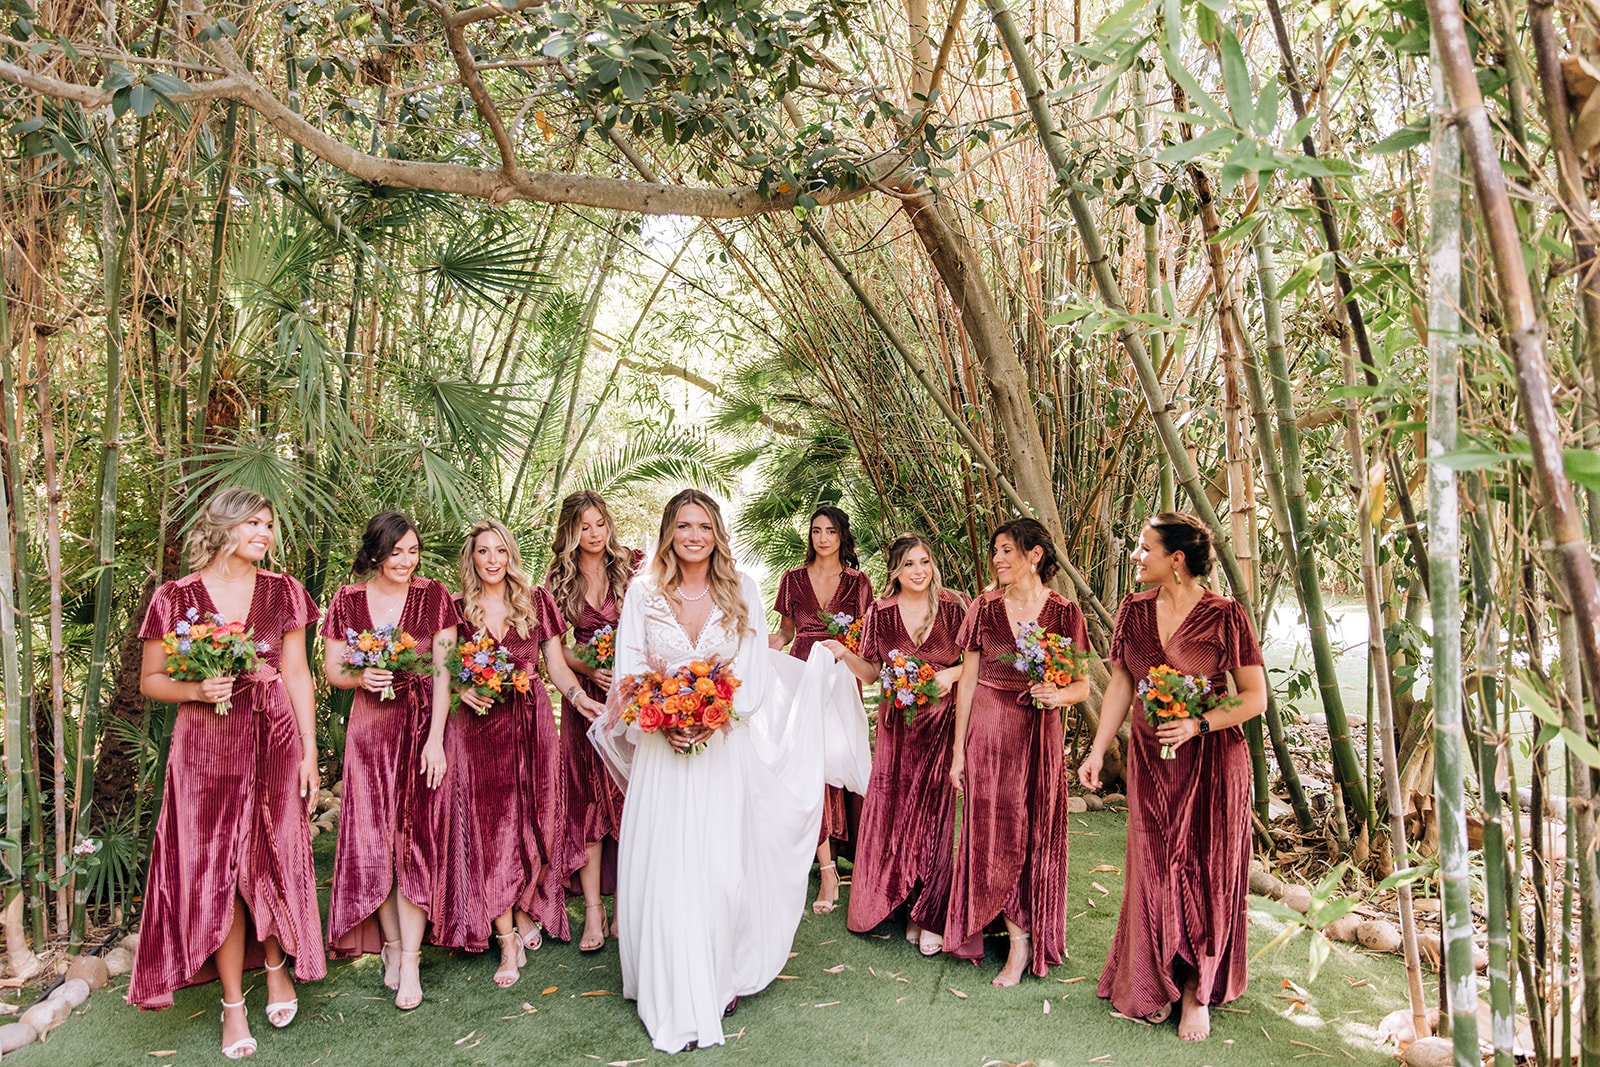 All About Weddings At The Botanica In Oceanside: A Tropical Paradise Wedding Venue